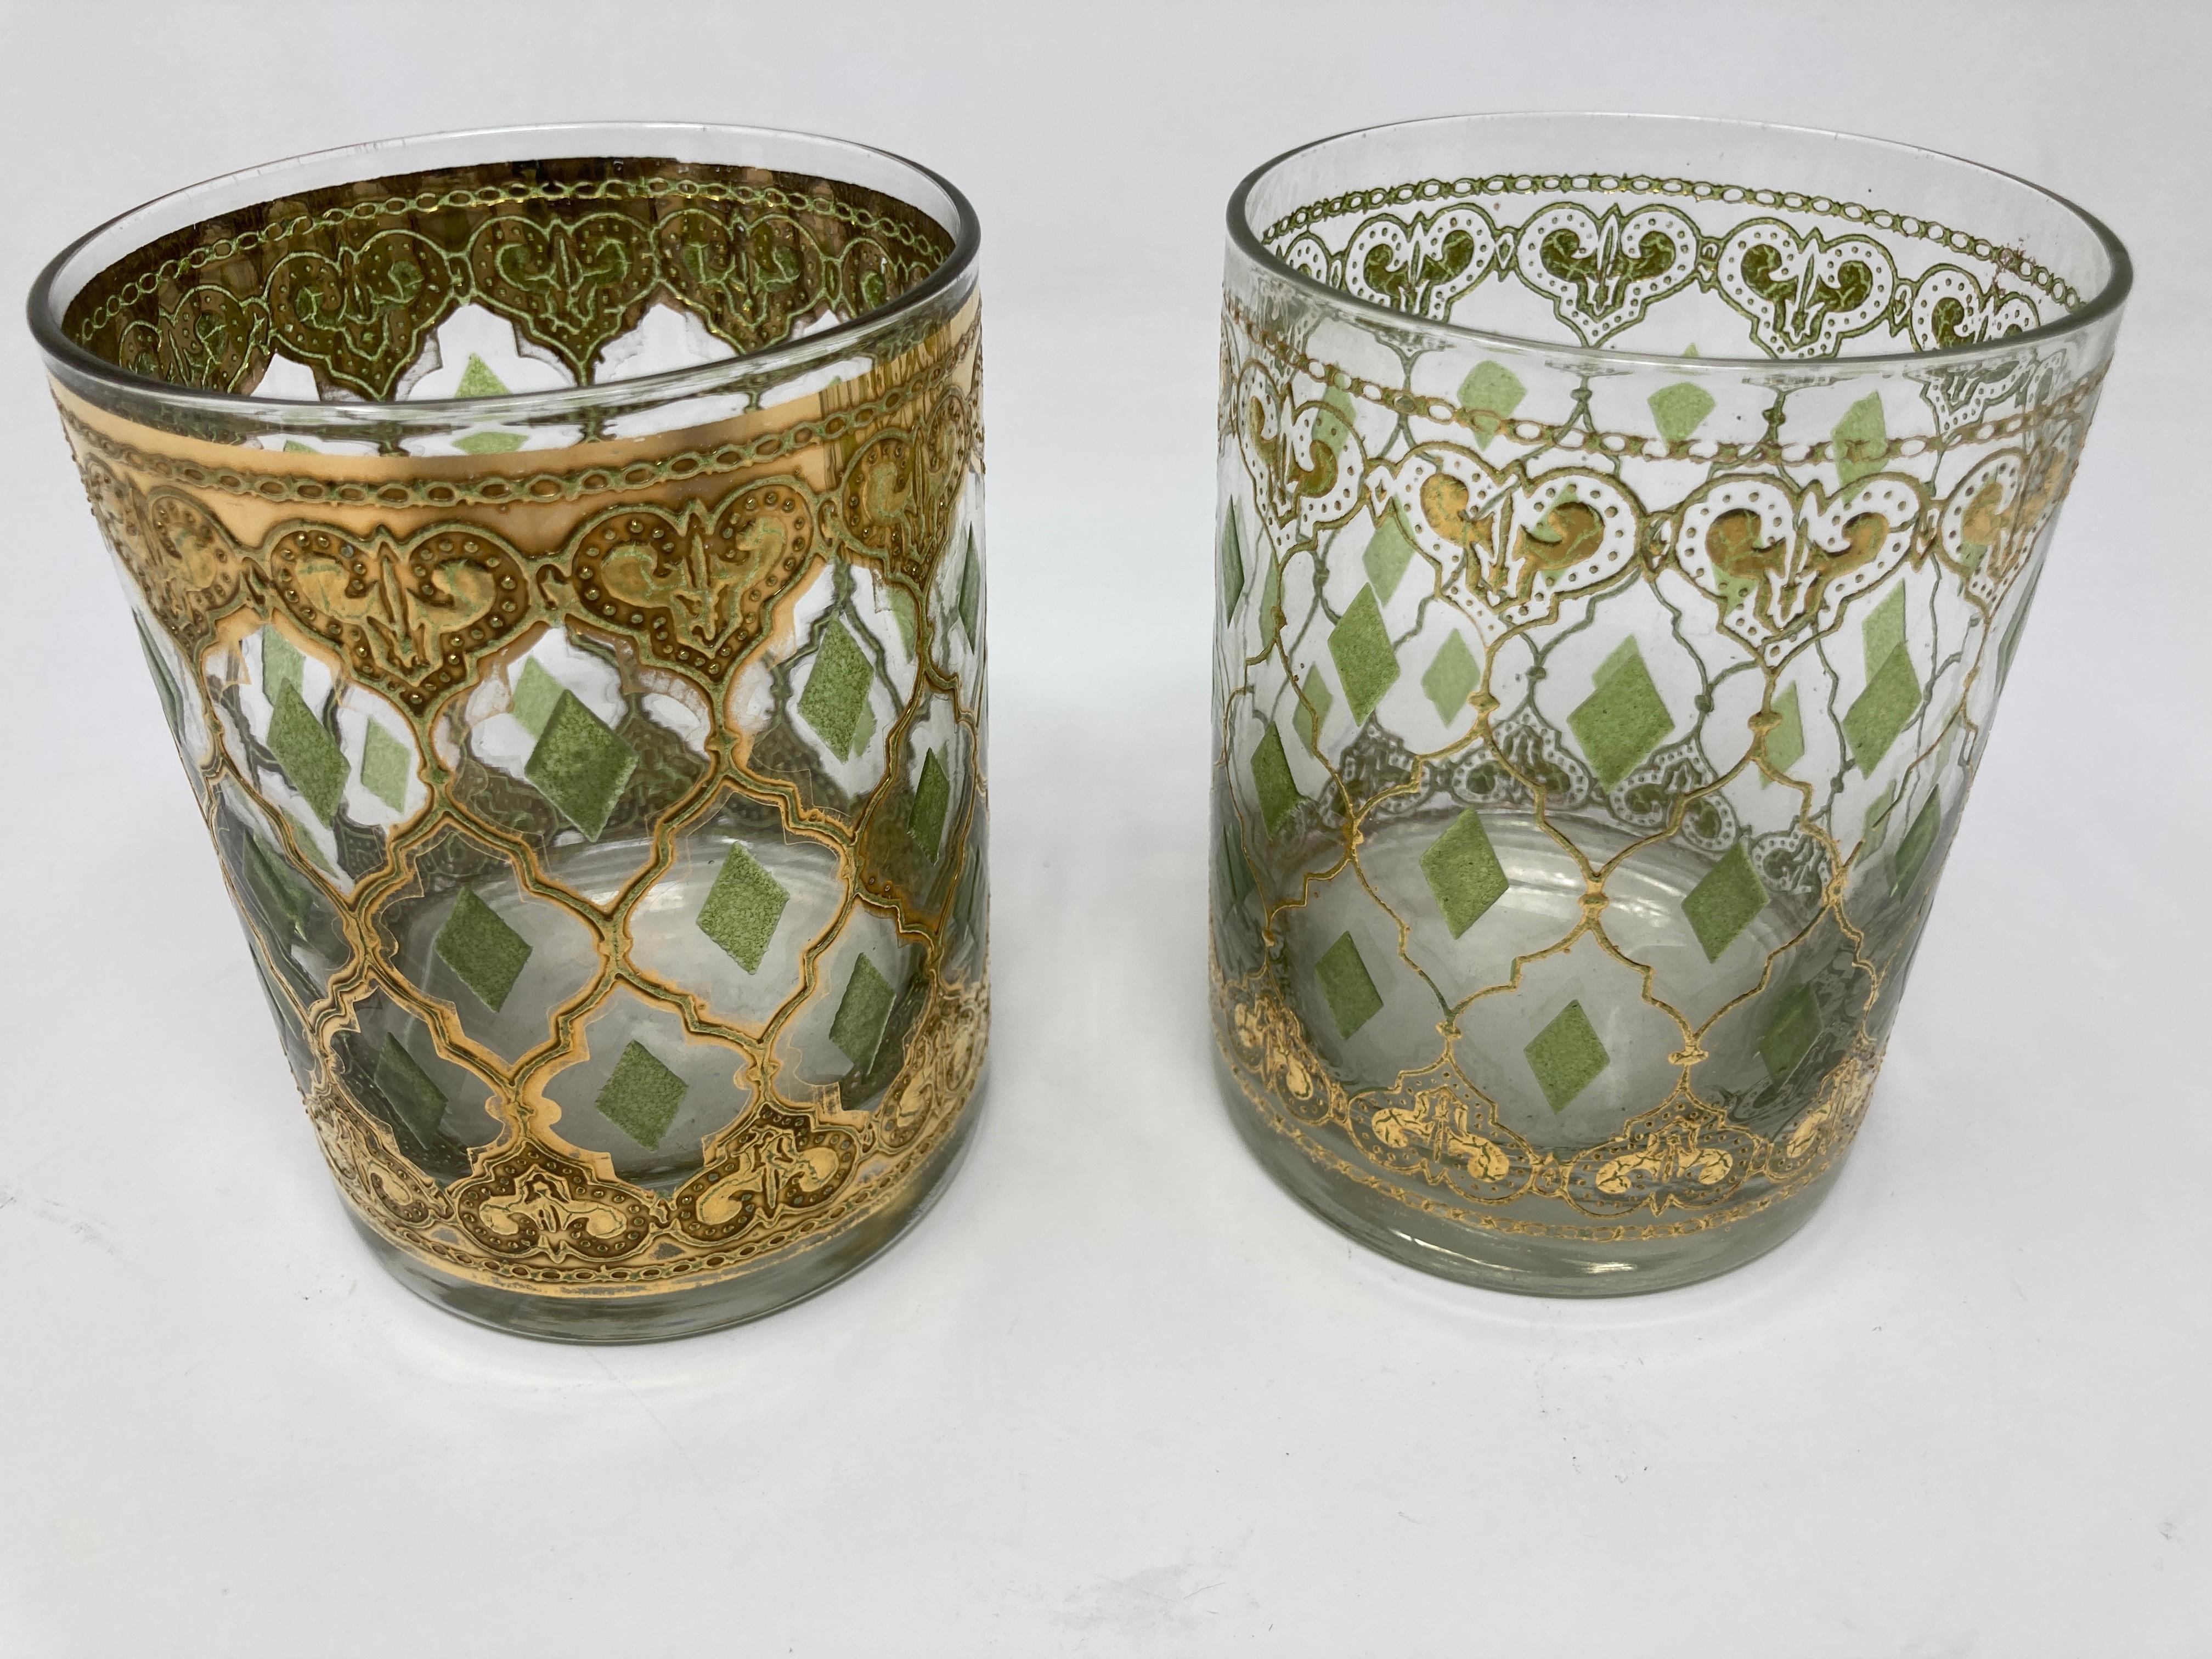 Elegant vintage midcentury Culver barware double old fashions, whisky glasses with Valencia pattern in a gold leaf finish.
Set includes 2 Culver lowball glasses in Valencia Moorish style design.
This fabulous vintage Culver set of barware with